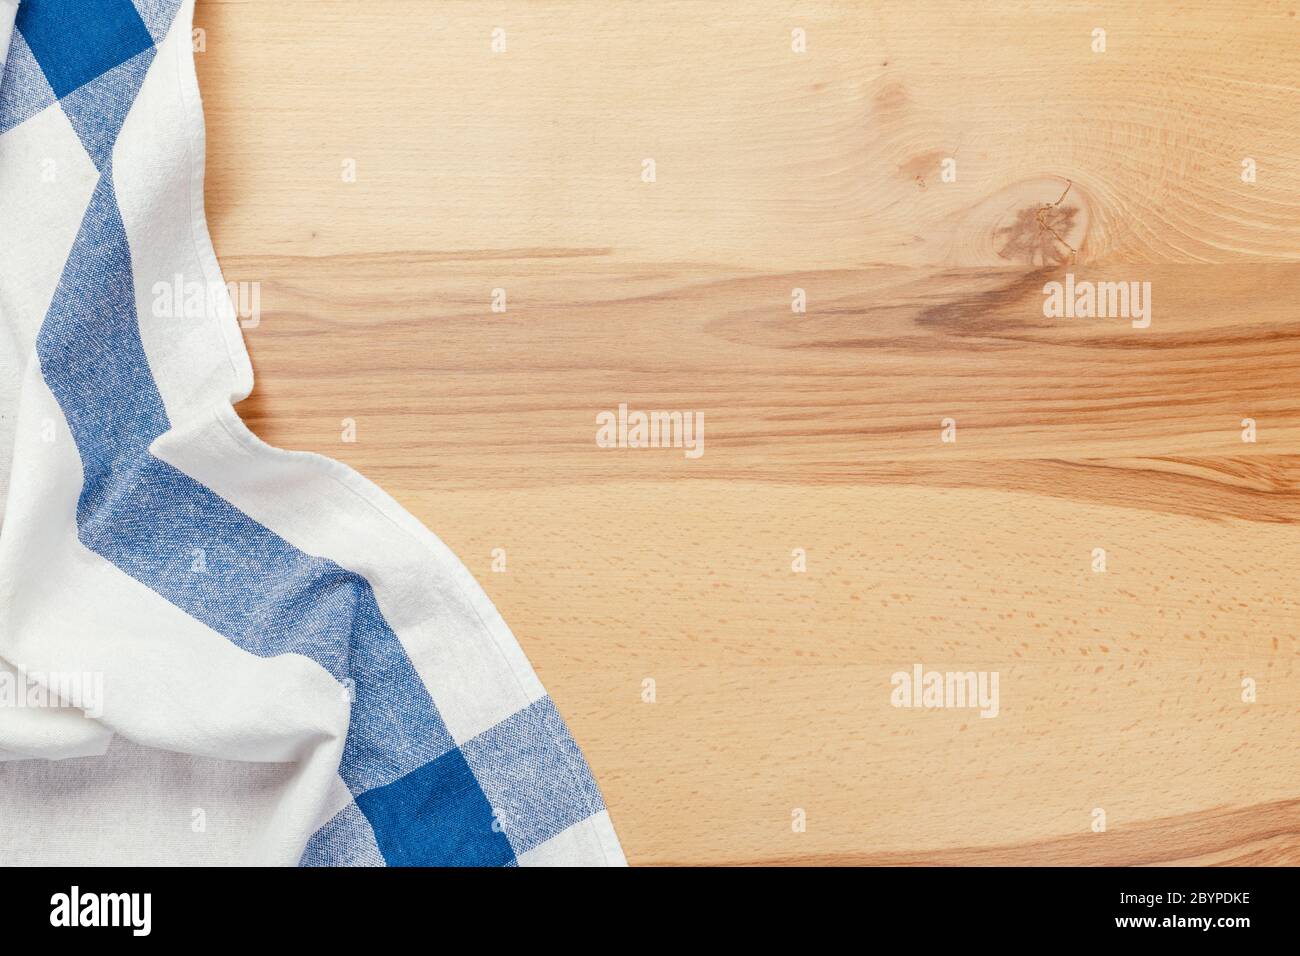 Top view on a wooden table with a linen kitchen towel or textile napkin. a tablecloth on a countertop made of old wood. Stock Photo